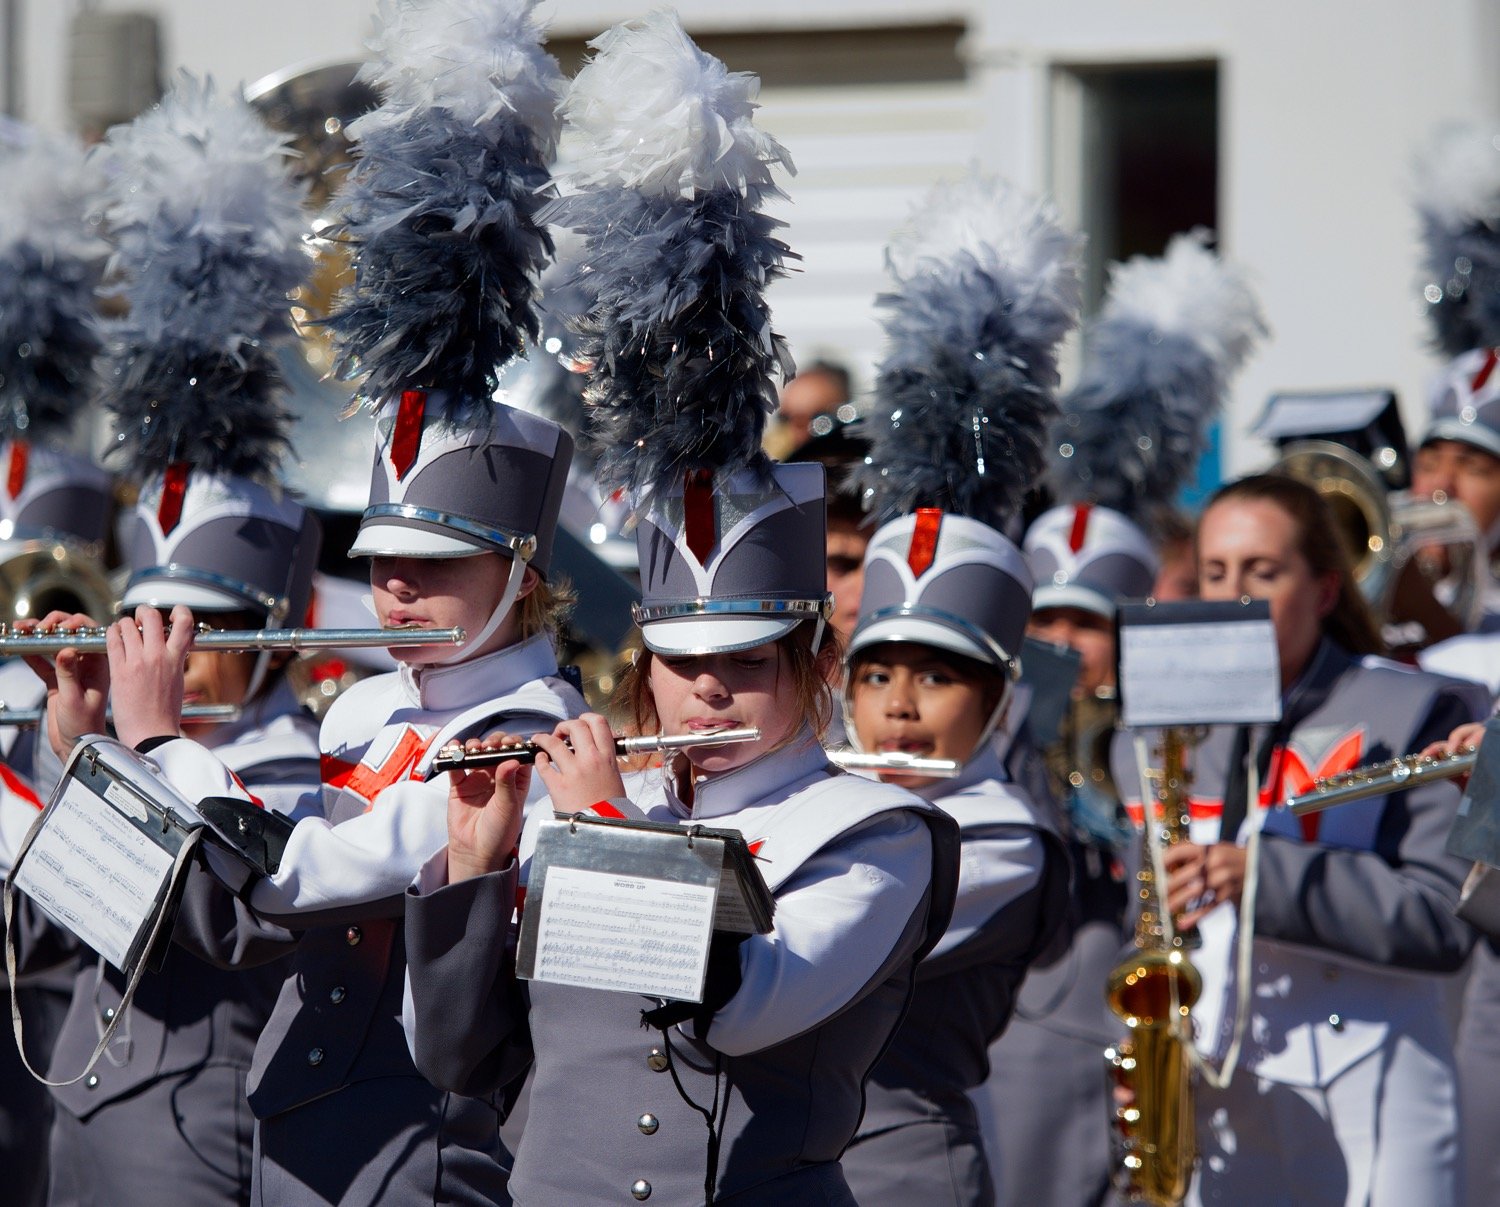 The Mineola High School band plays excellent renditions of each military branches' anthems. [view more vets]